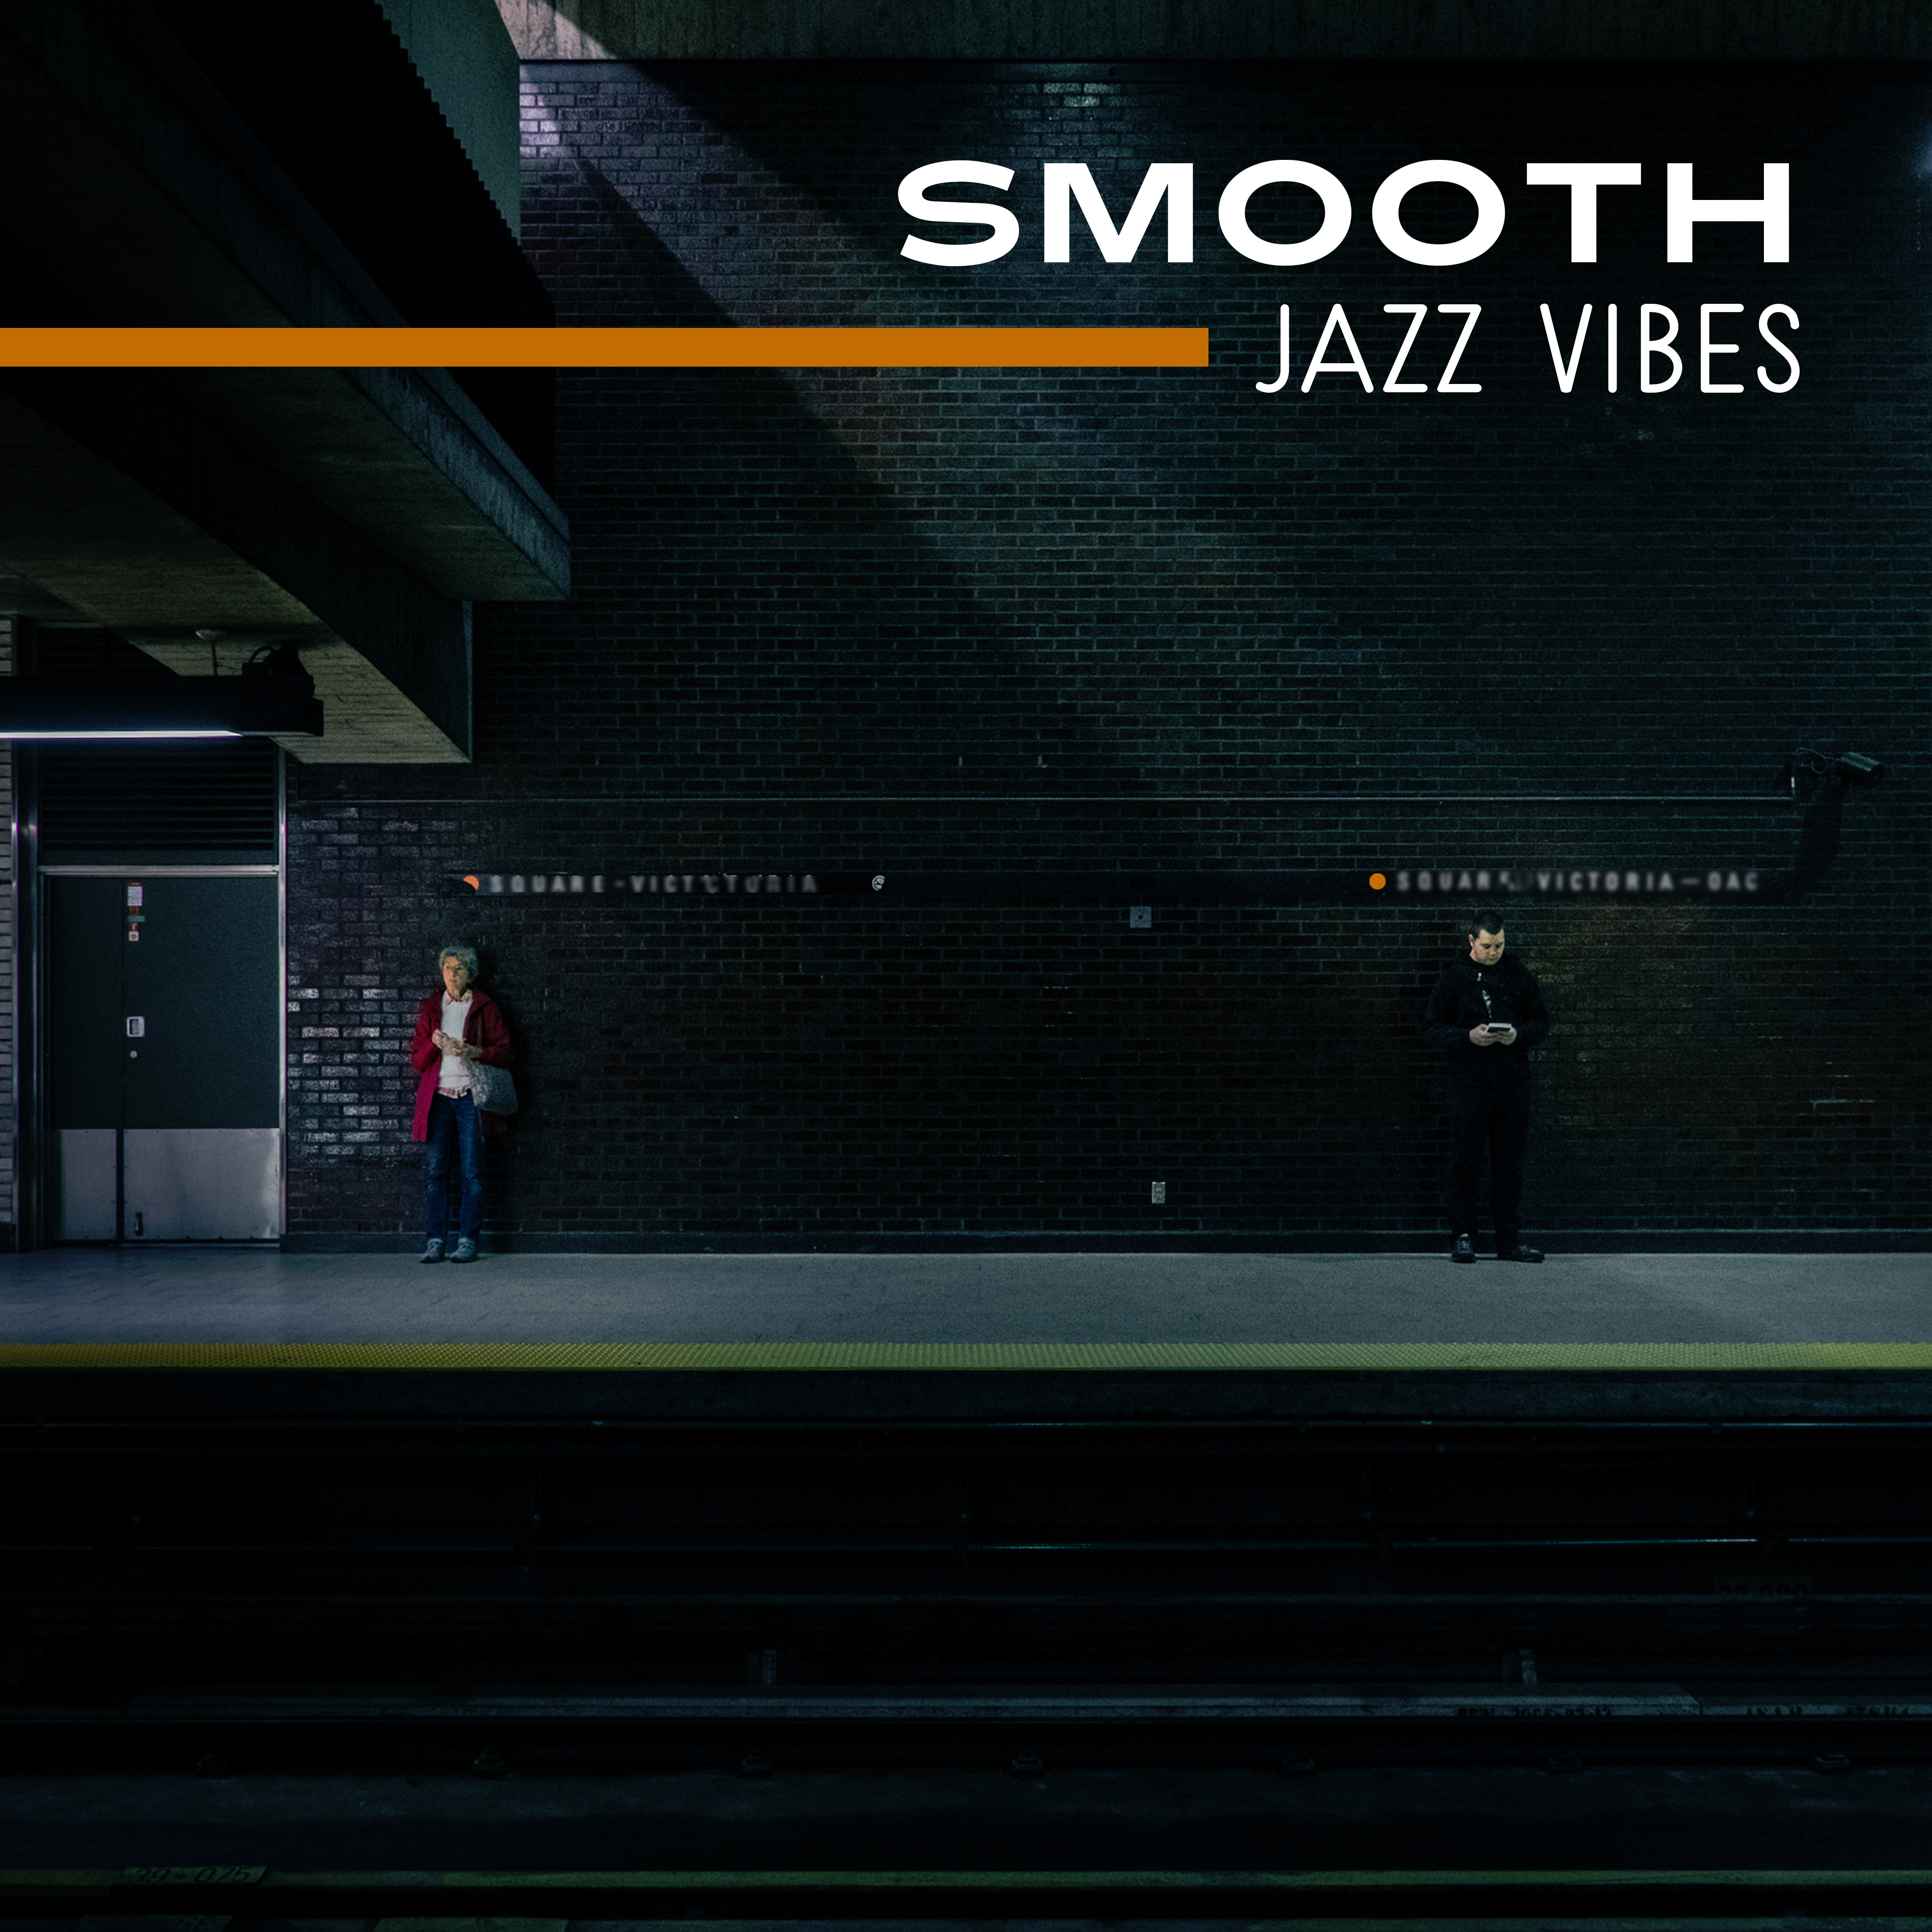 Smooth Jazz Vibes  Calming Jazz to Relax, Smooth Music, Piano Bar Sounds